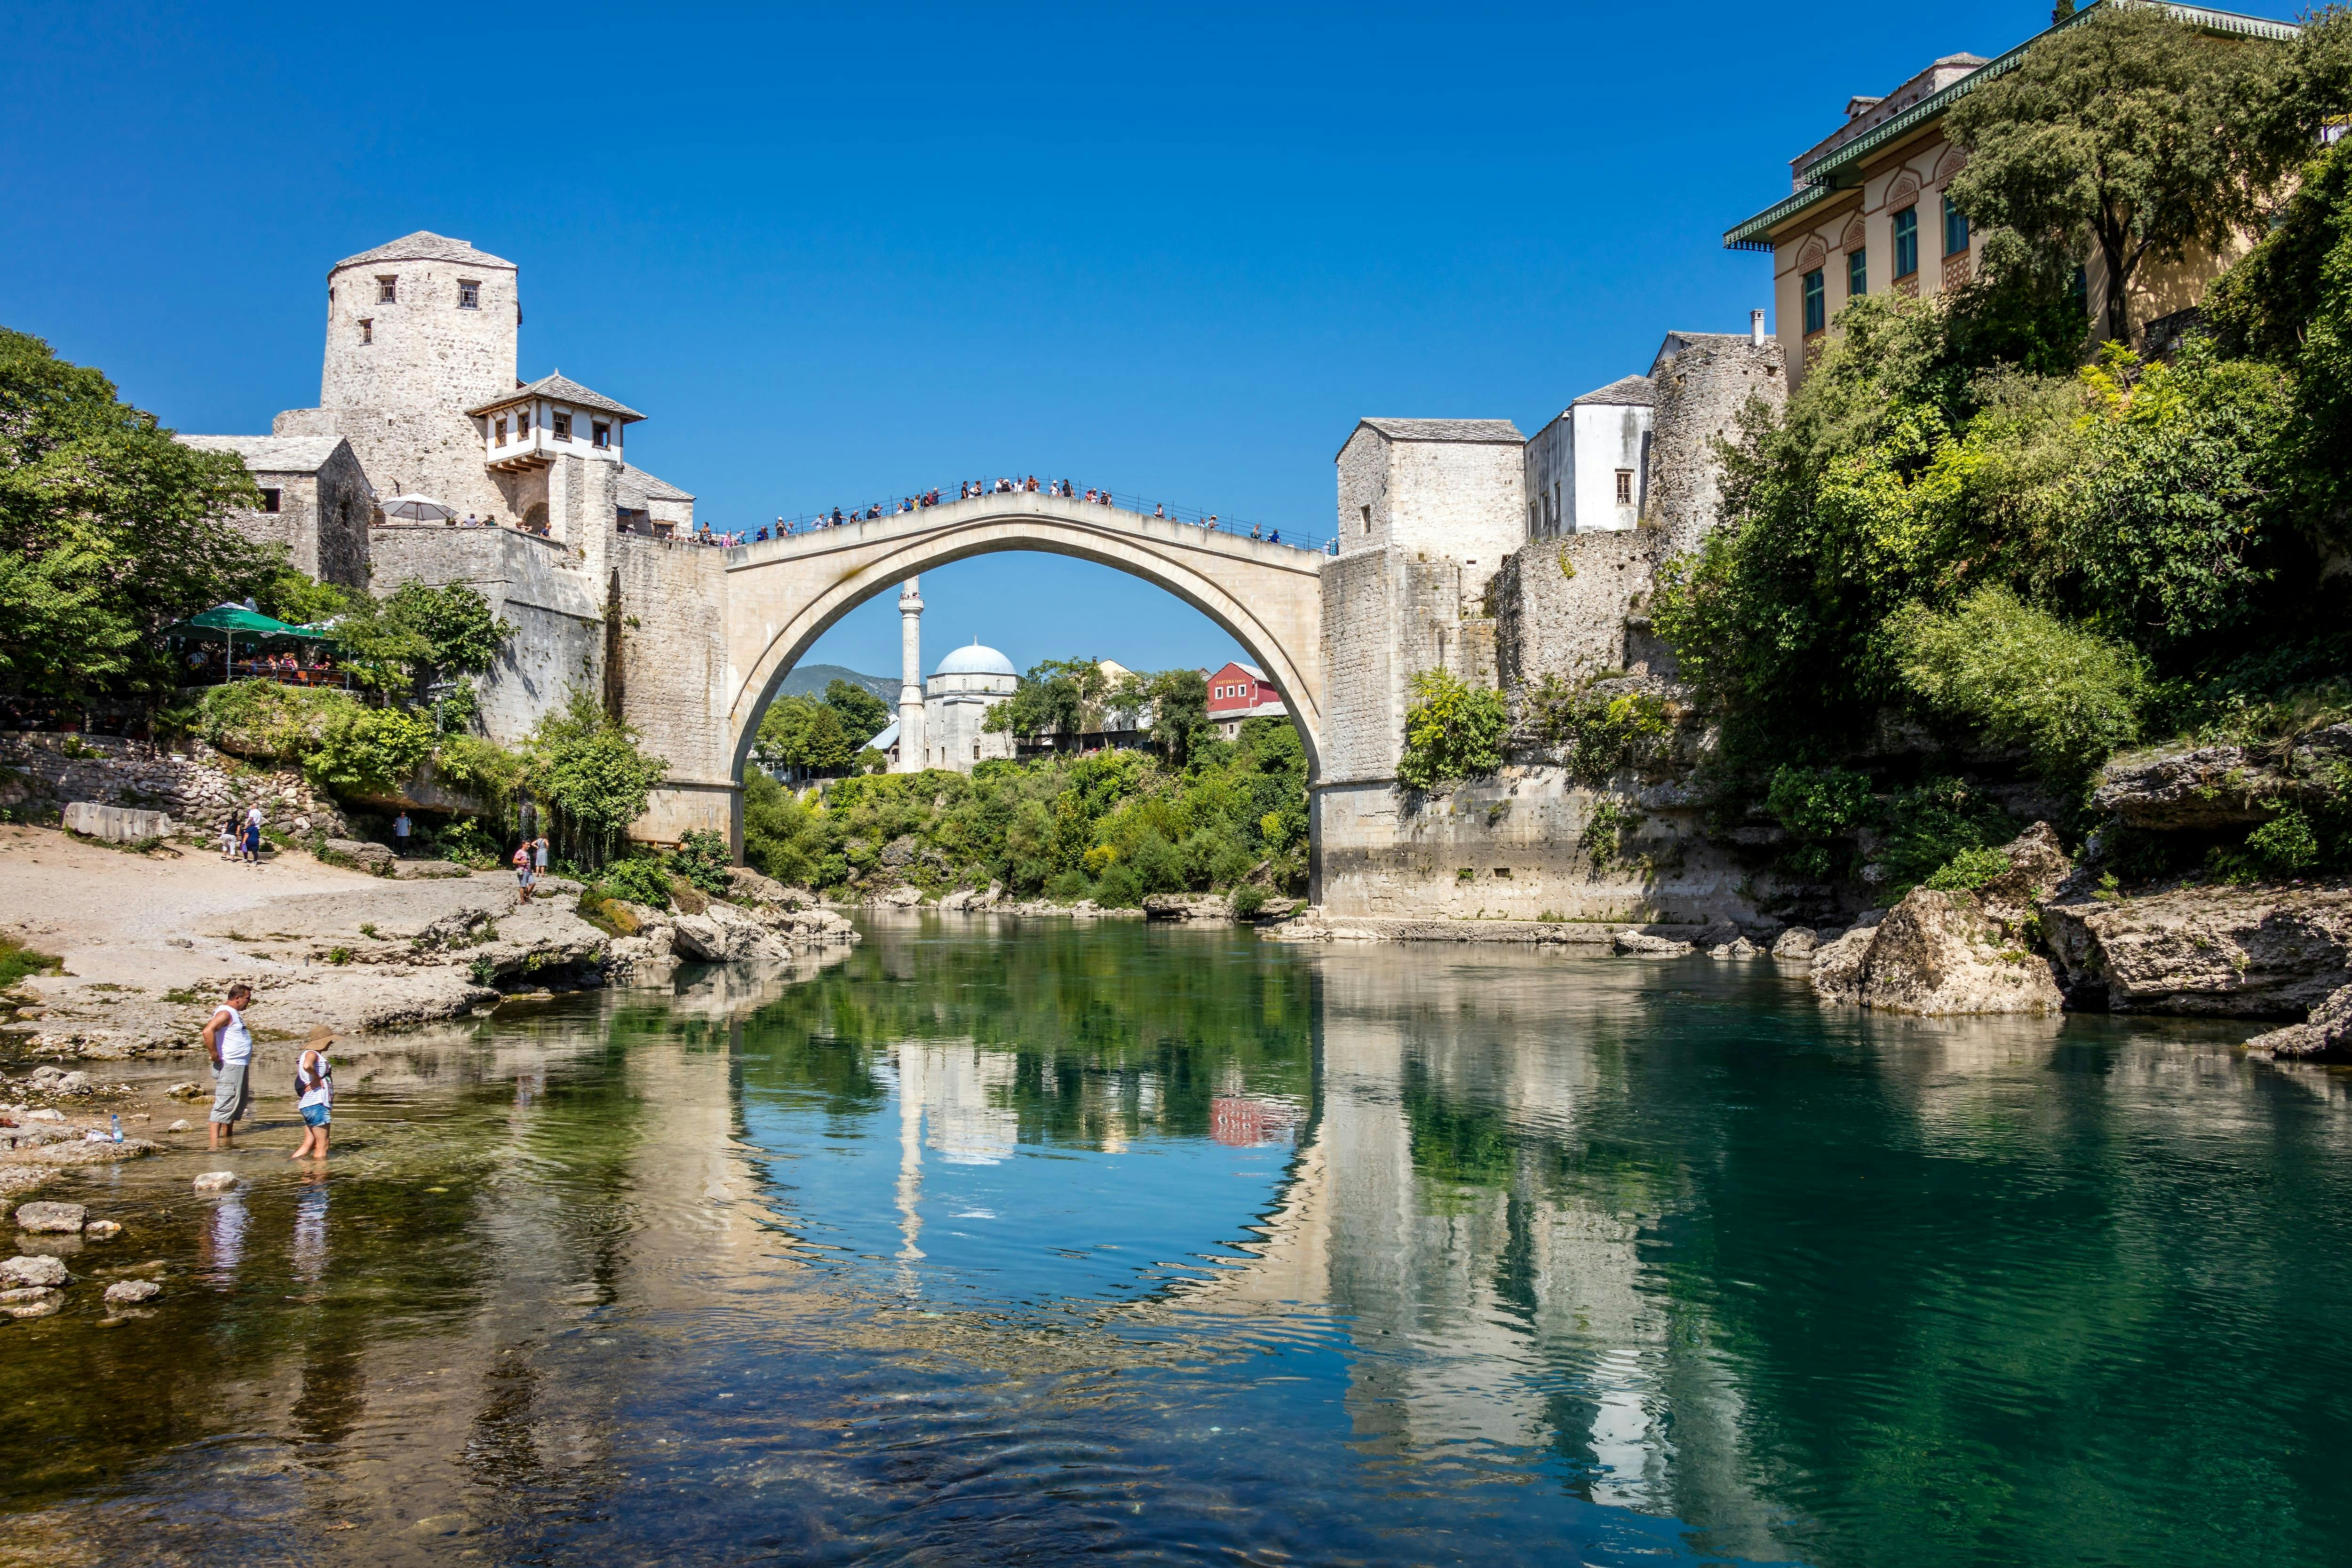 Mostar City Tour with Ottoman Home